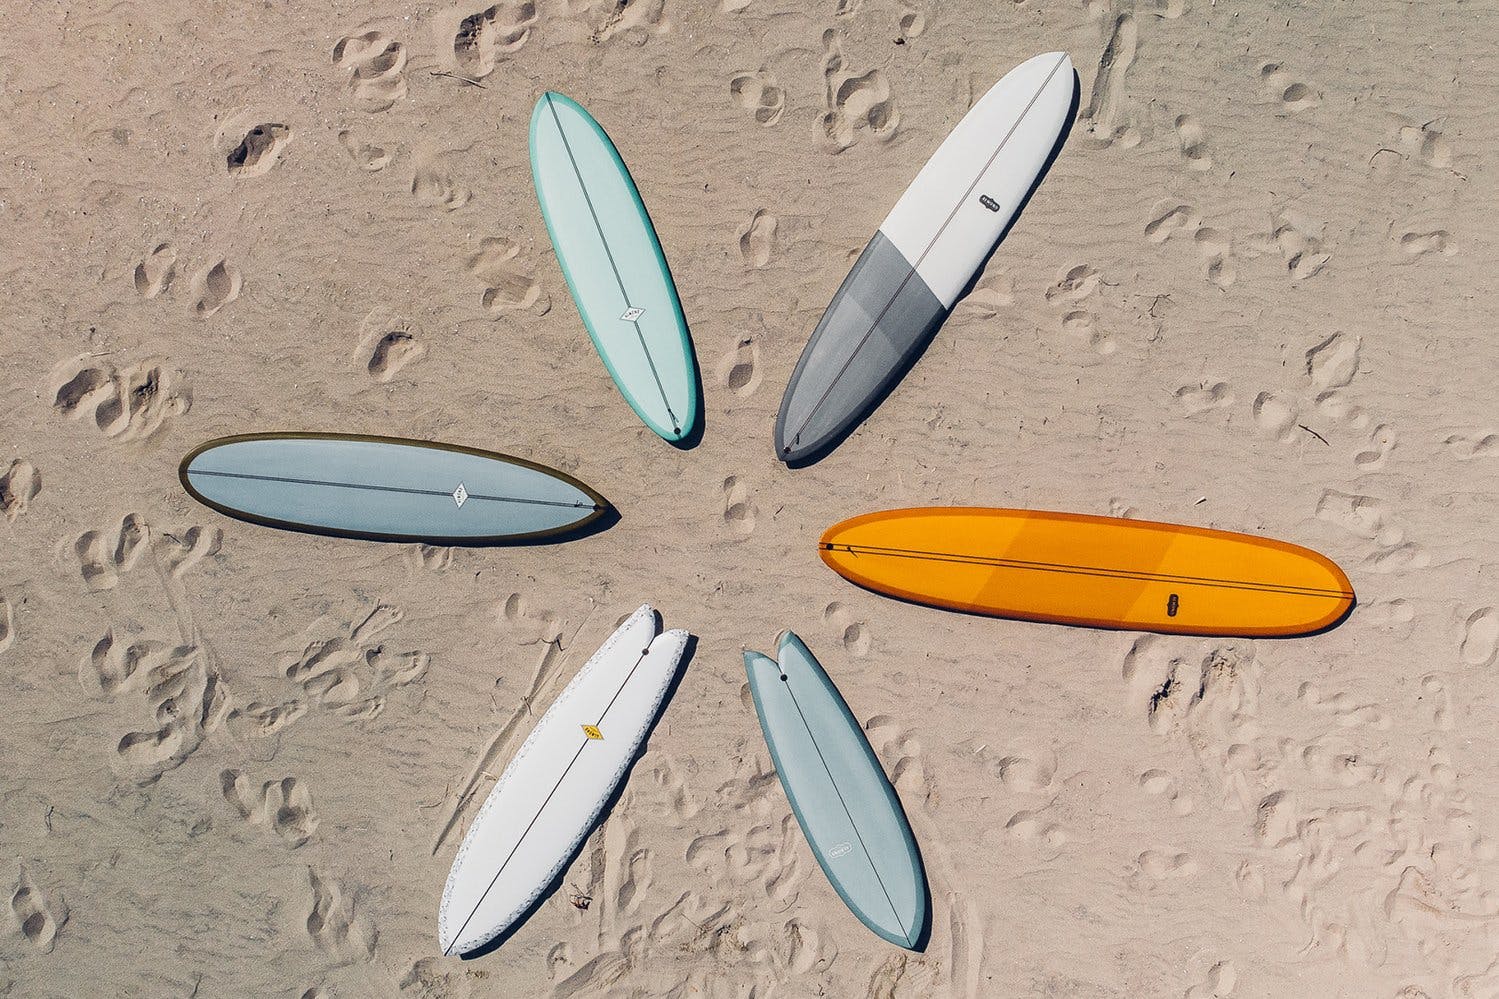 A ring of multicolored almond surfboards on sand.